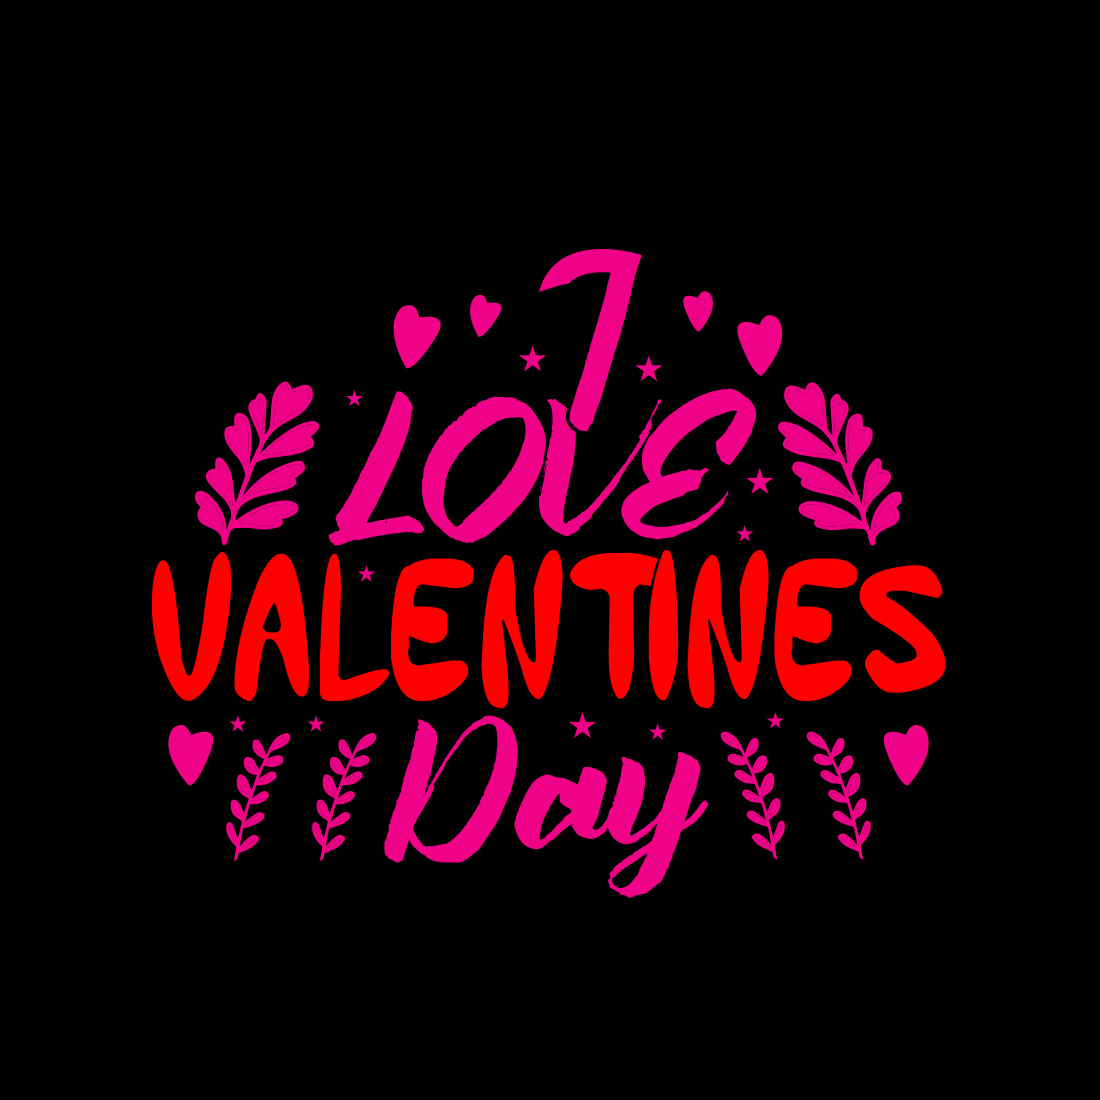 Valentine's Day Typography T-shirt Design cover image.